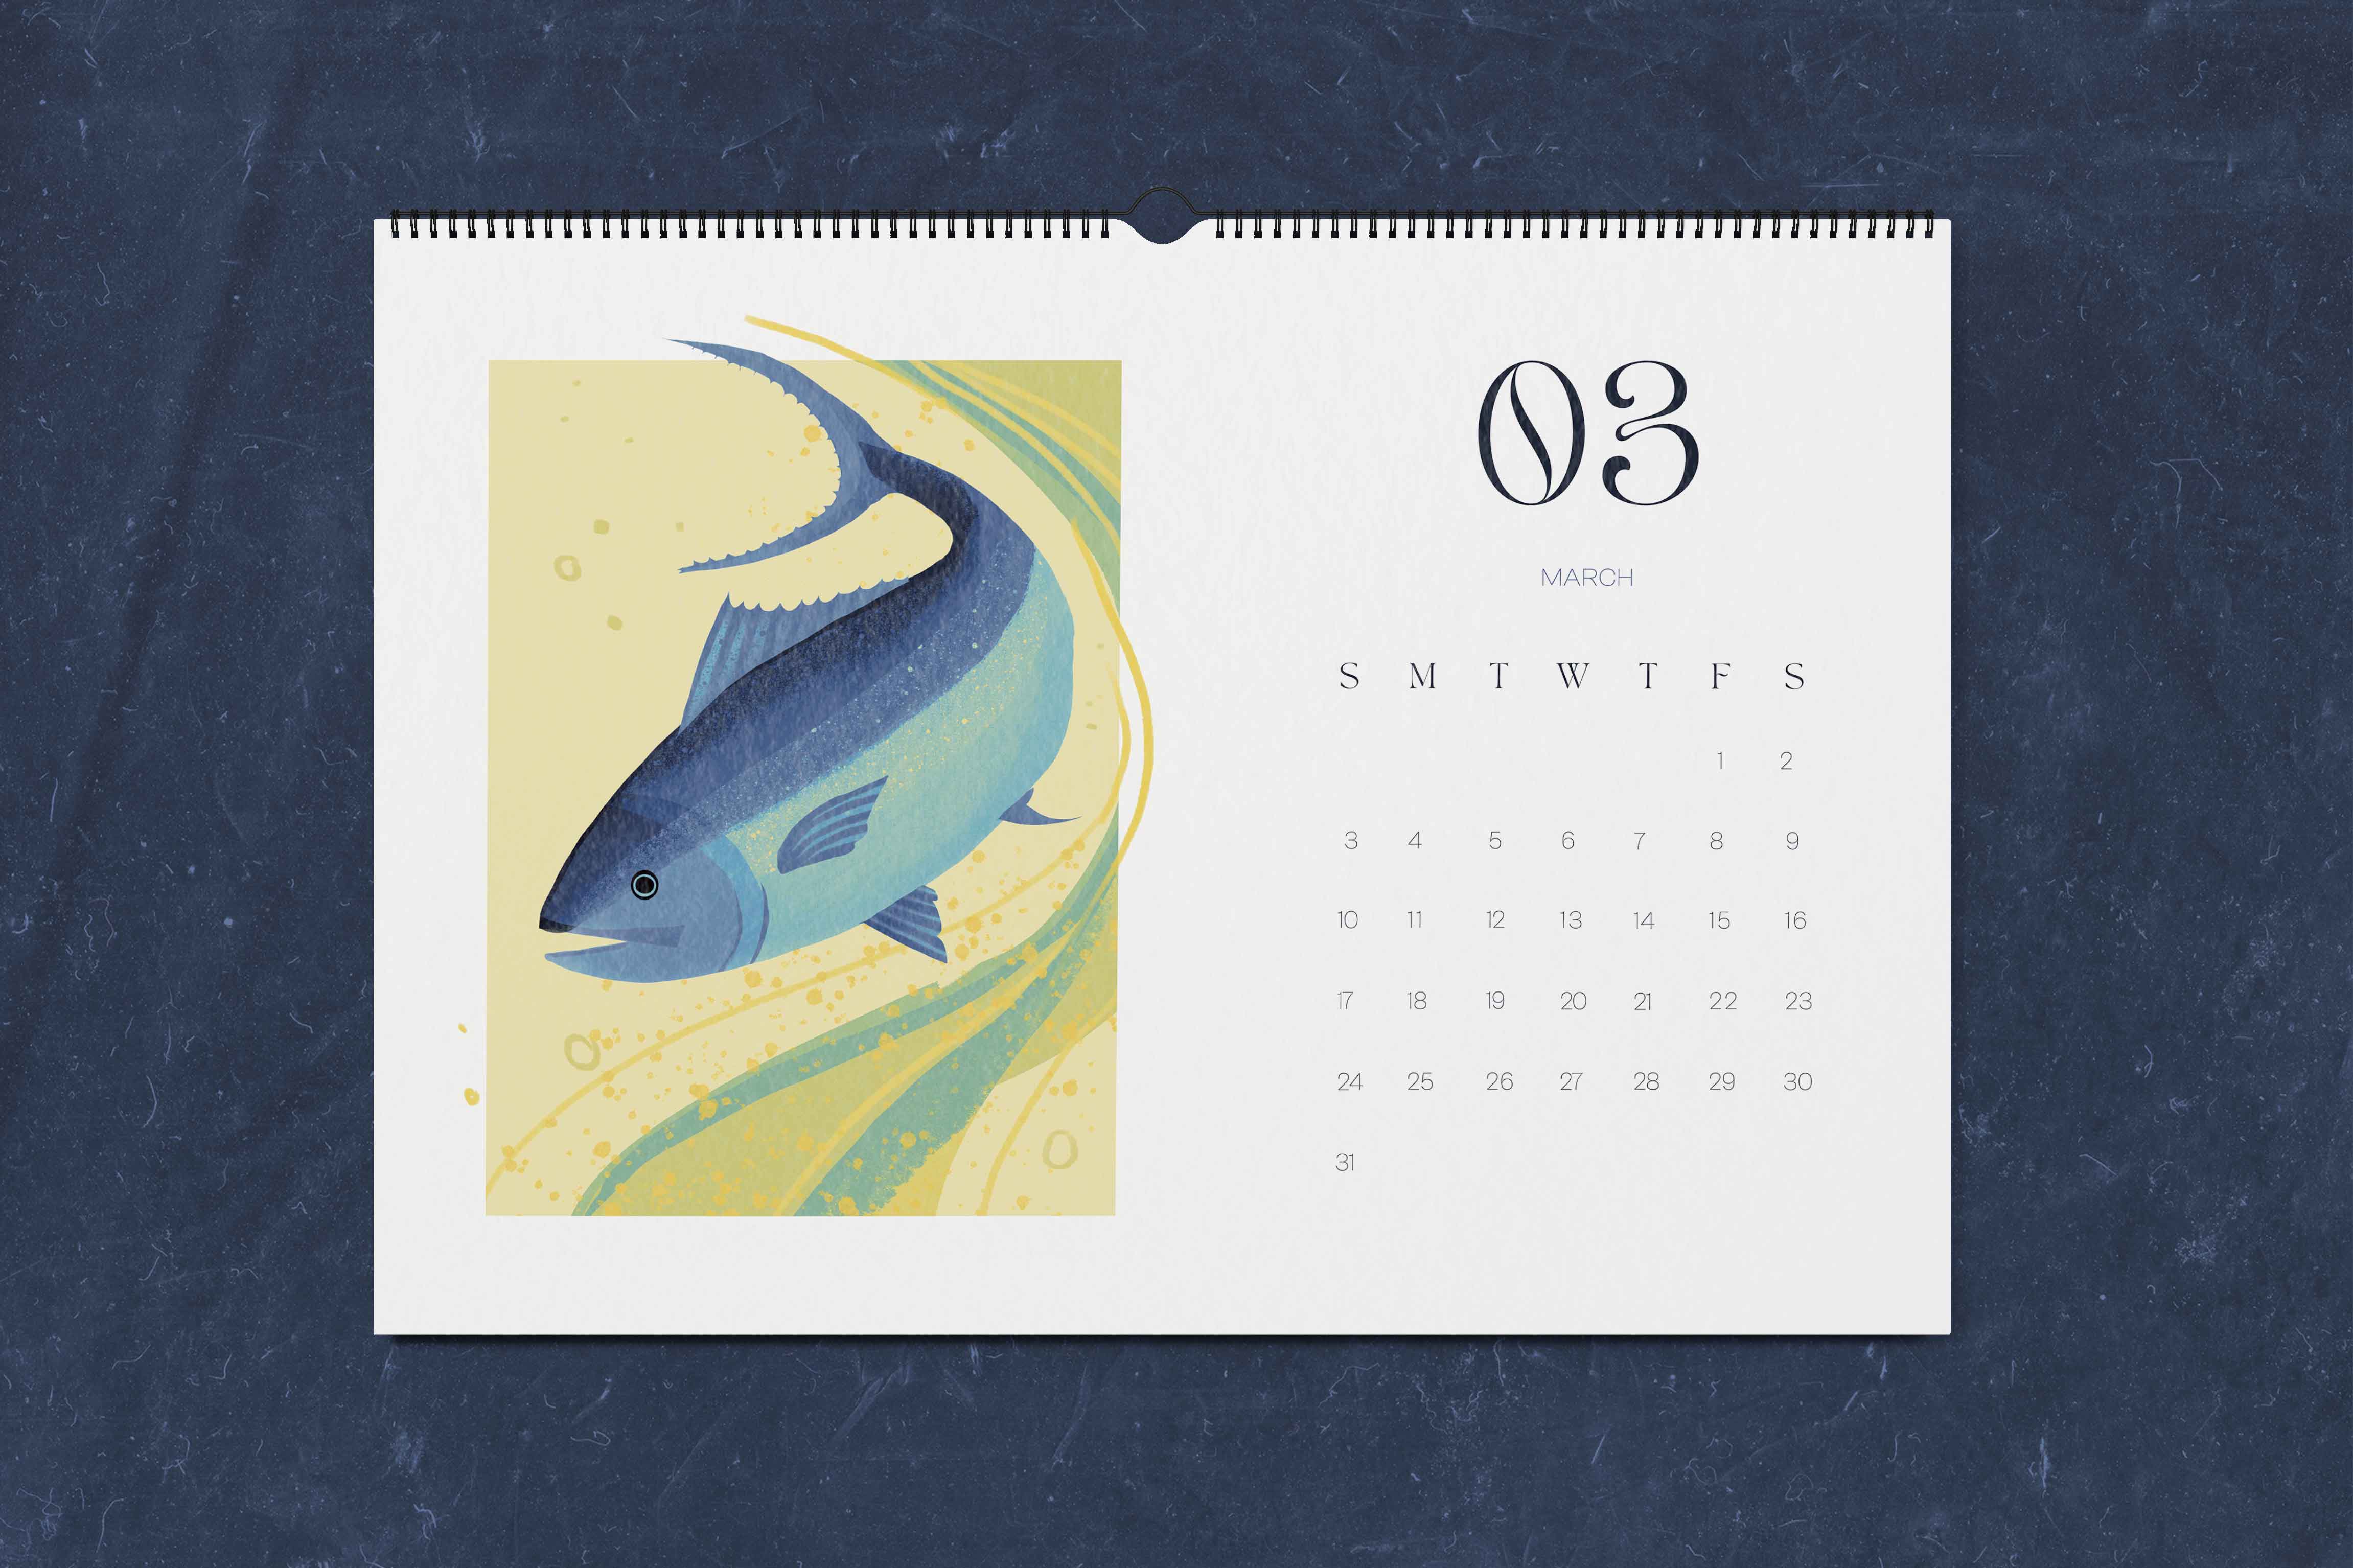 An illustrated calendar on a blue background